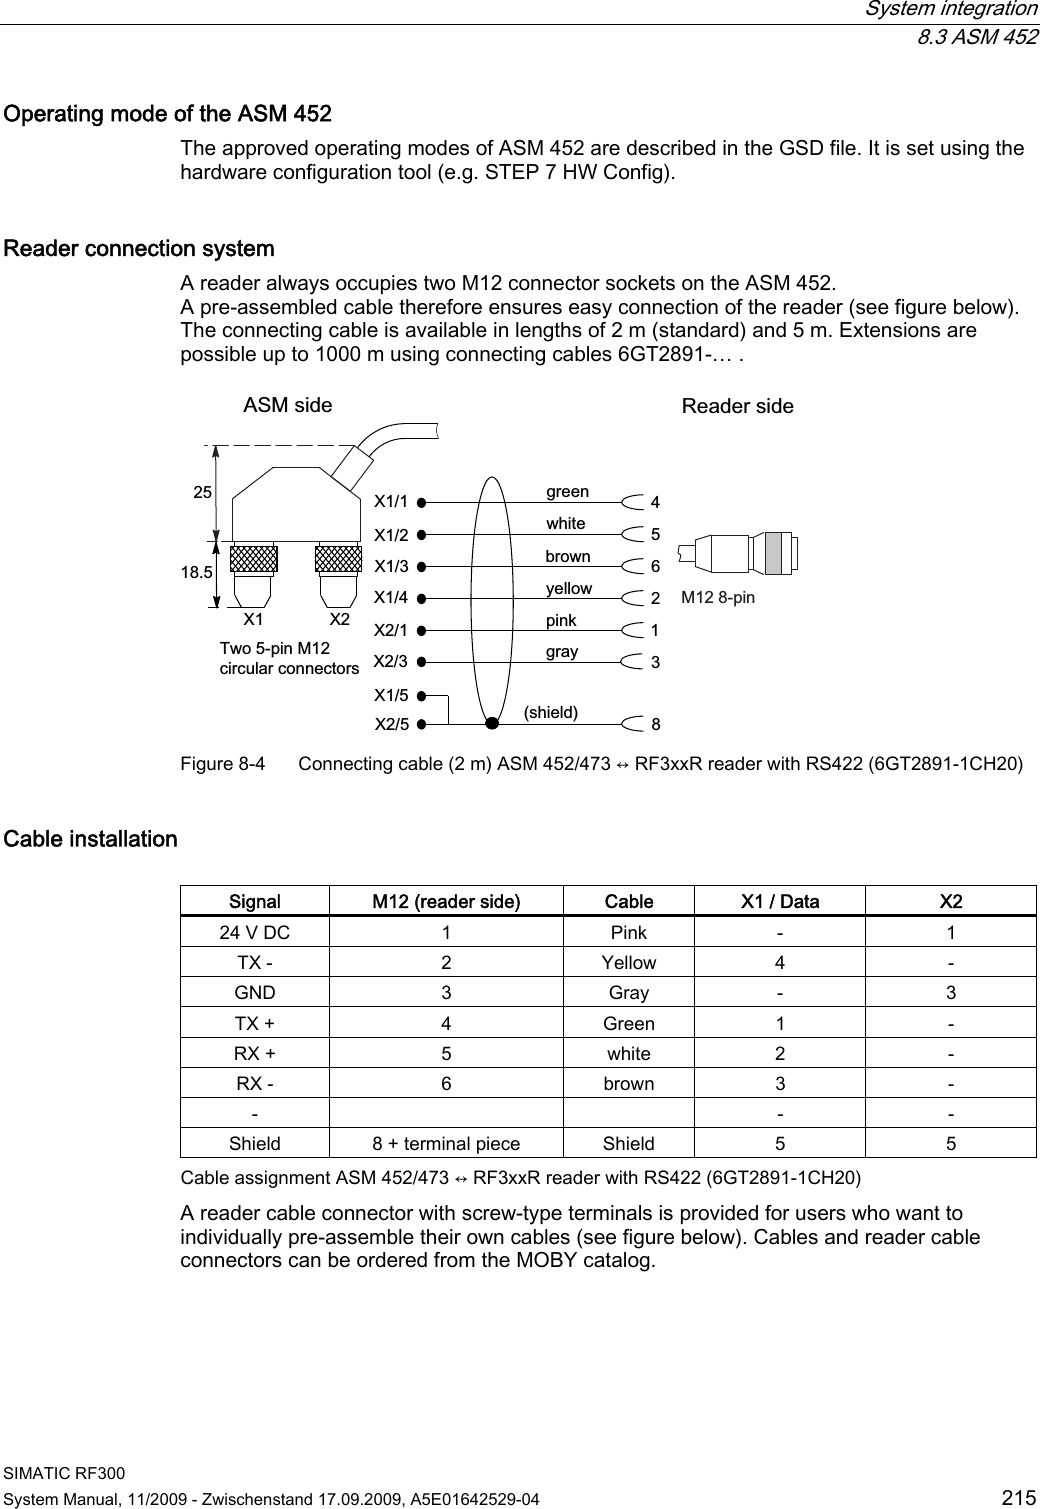  System integration  8.3 ASM 452 SIMATIC RF300 System Manual, 11/2009 - Zwischenstand 17.09.2009, A5E01642529-04  215 Operating mode of the ASM 452  The approved operating modes of ASM 452 are described in the GSD file. It is set using the hardware configuration tool (e.g. STEP 7 HW Config). Reader connection system  A reader always occupies two M12 connector sockets on the ASM 452. A pre-assembled cable therefore ensures easy connection of the reader (see figure below). The connecting cable is available in lengths of 2 m (standard) and 5 m. Extensions are possible up to 1000 m using connecting cables 6GT2891-… .  JUD\JUHHQZKLWHEURZQ\HOORZSLQNVKLHOG7ZRSLQ0FLUFXODUFRQQHFWRUV$60VLGH 5HDGHUVLGH0SLQ ;;;;;;; ; ;; Figure 8-4  Connecting cable (2 m) ASM 452/473 ↔ RF3xxR reader with RS422 (6GT2891-1CH20)  Cable installation  Signal  M12 (reader side)  Cable  X1 / Data  X2 24 V DC  1  Pink  -  1 TX -  2  Yellow  4  - GND  3  Gray  -  3 TX +  4  Green  1  - RX +  5  white  2  - RX -  6  brown  3  - -      -  - Shield  8 + terminal piece  Shield  5  5 Cable assignment ASM 452/473 ↔ RF3xxR reader with RS422 (6GT2891-1CH20) A reader cable connector with screw-type terminals is provided for users who want to individually pre-assemble their own cables (see figure below). Cables and reader cable connectors can be ordered from the MOBY catalog.  